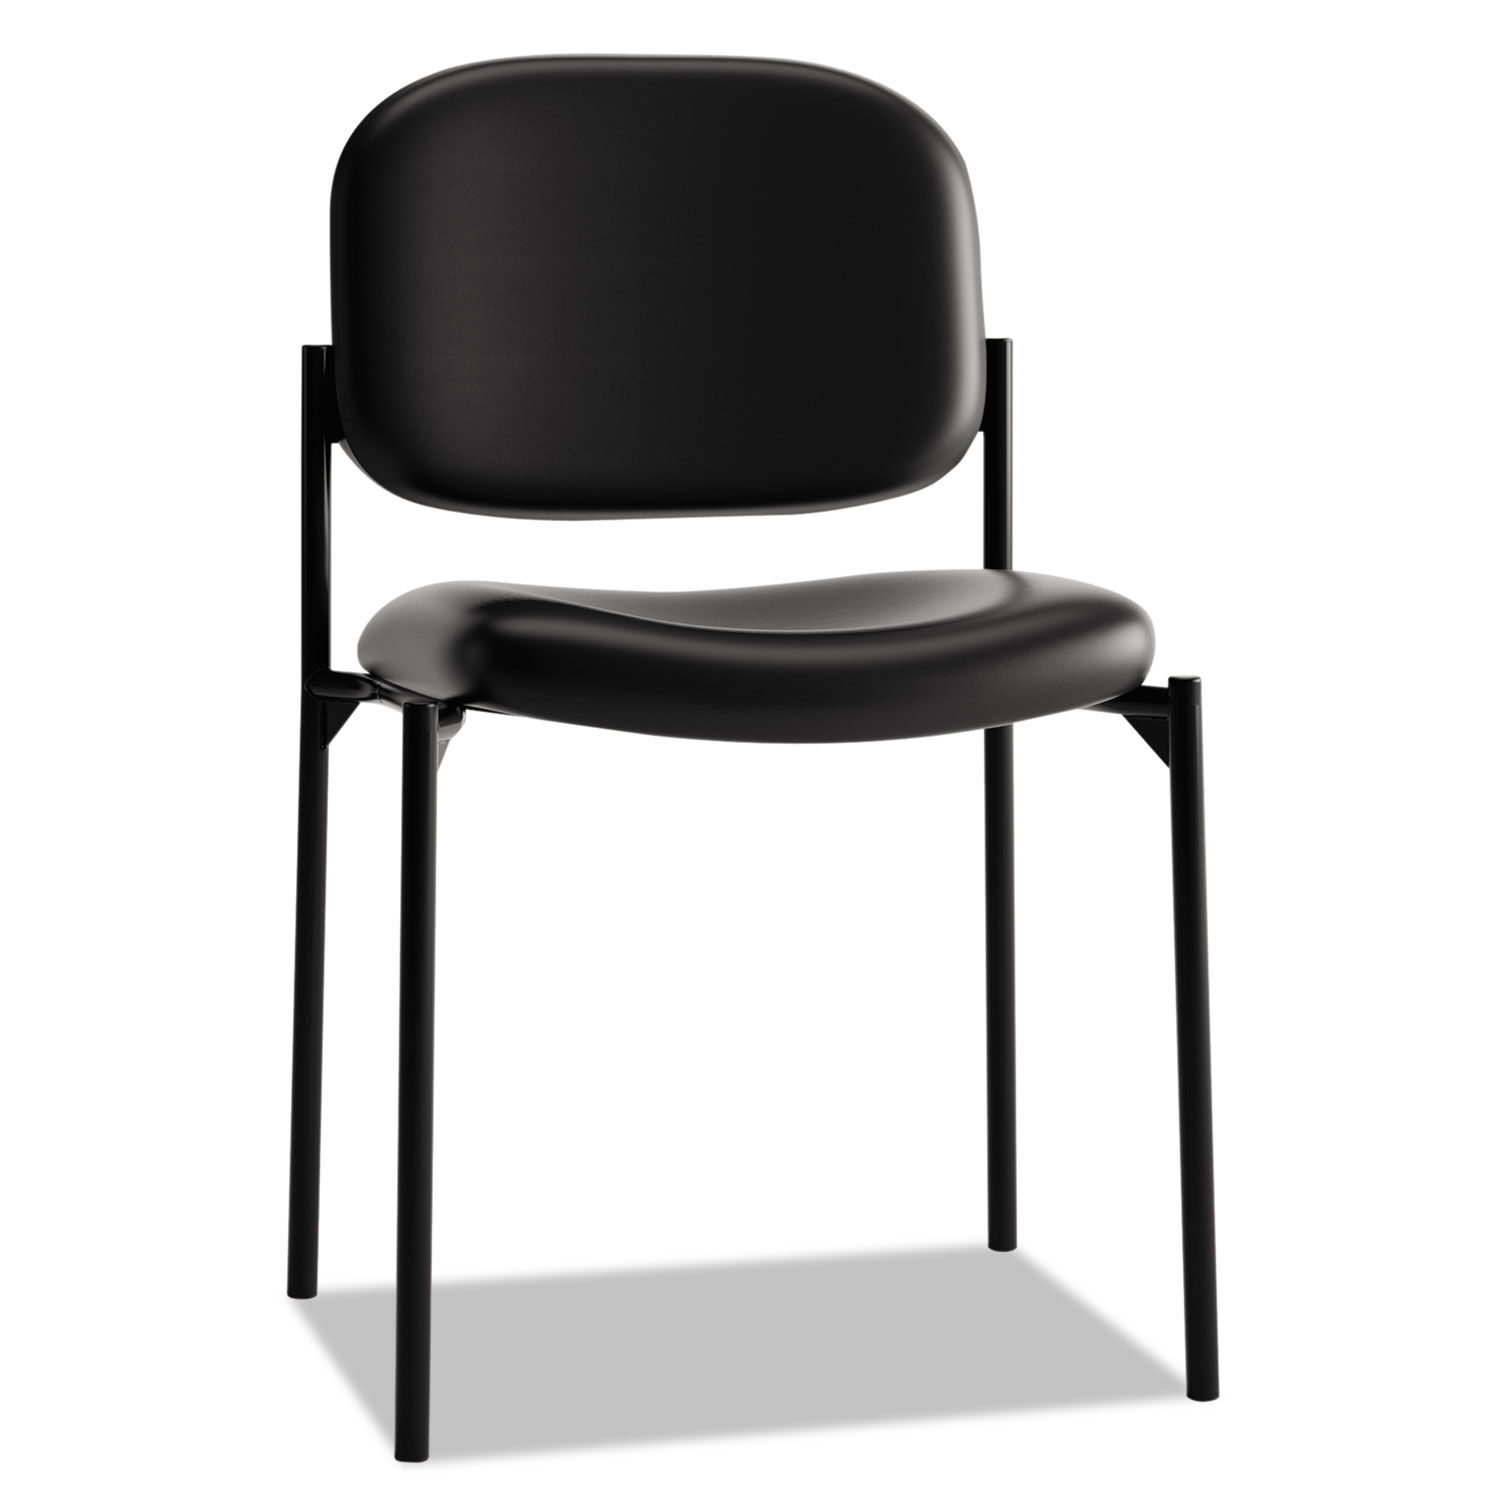 VL606 Stacking Guest Chair without Arms Bonded Leather Upholstery, 21.25" x 21" x 32.75", Black Seat, Black Back, Black Base